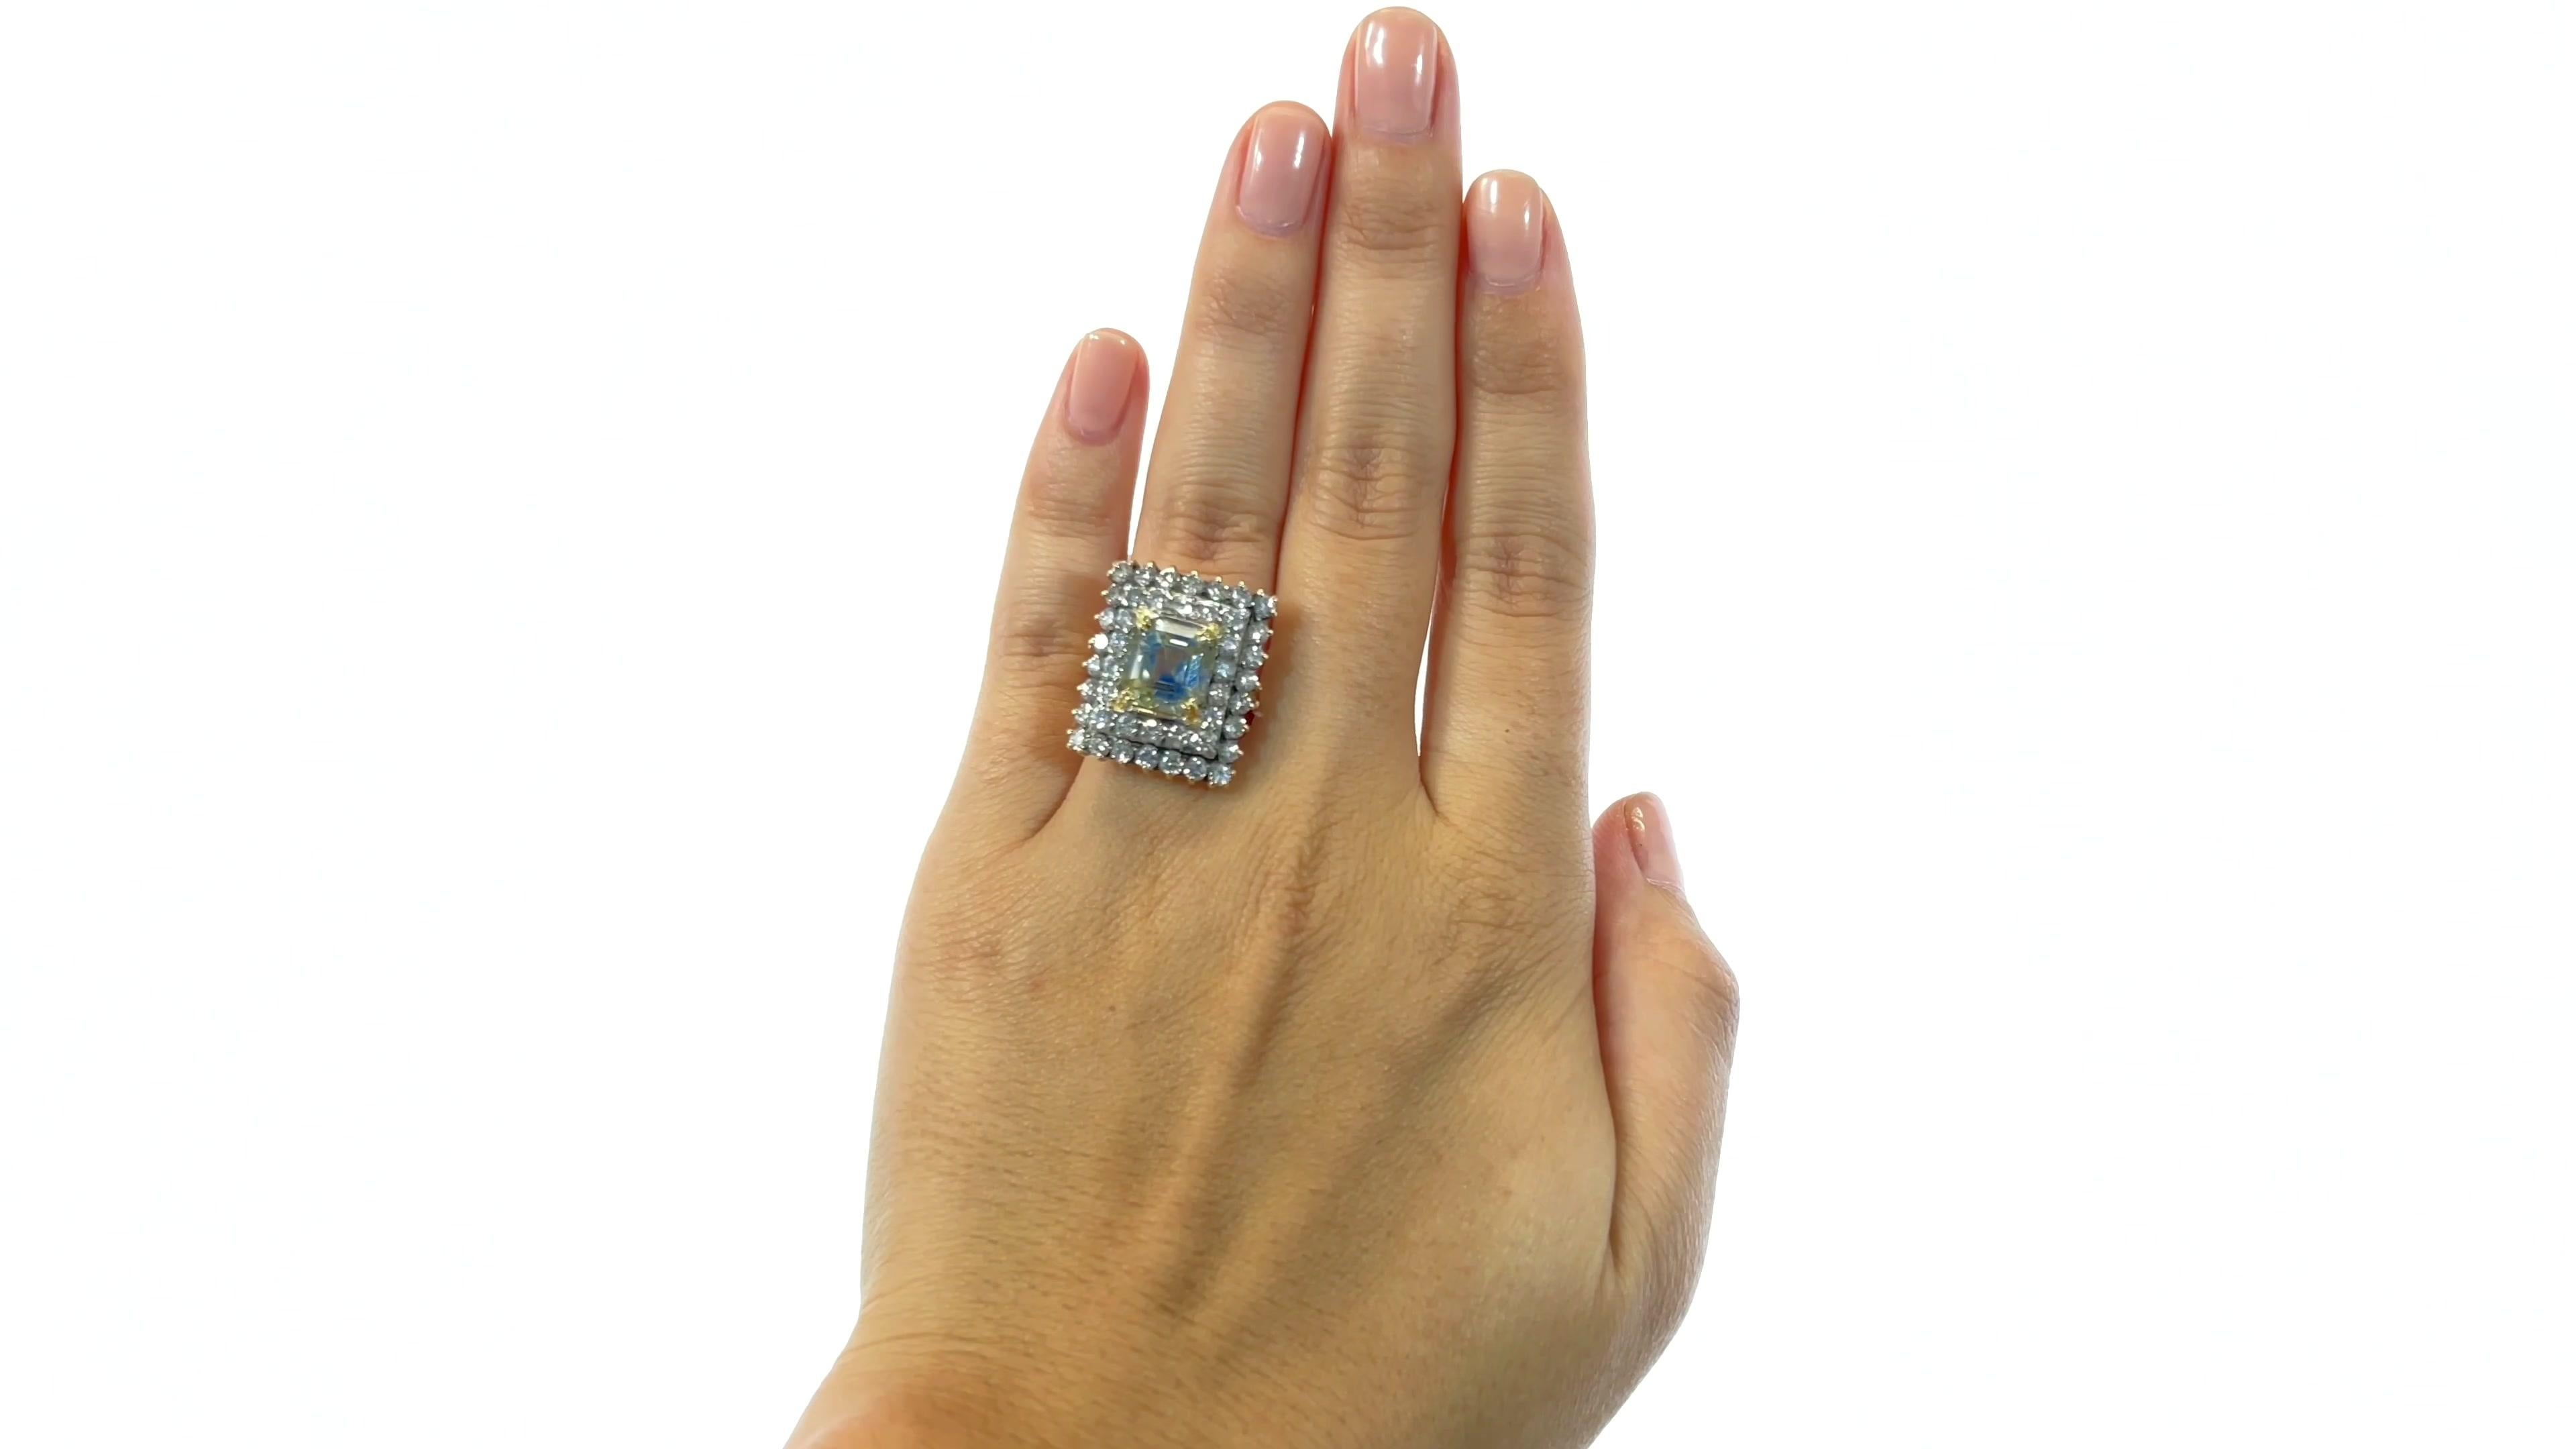 Retro Victorian Revival 6.64 Carat Emerald Cut Yellow Sapphire Diamond Gold Ring. Featuring 44 round brilliant diamonds  diamond approximately 1.76 carats F-G color, VS clarity. Yellow gold and silver top. Circa 1940s.

About the piece: How often do